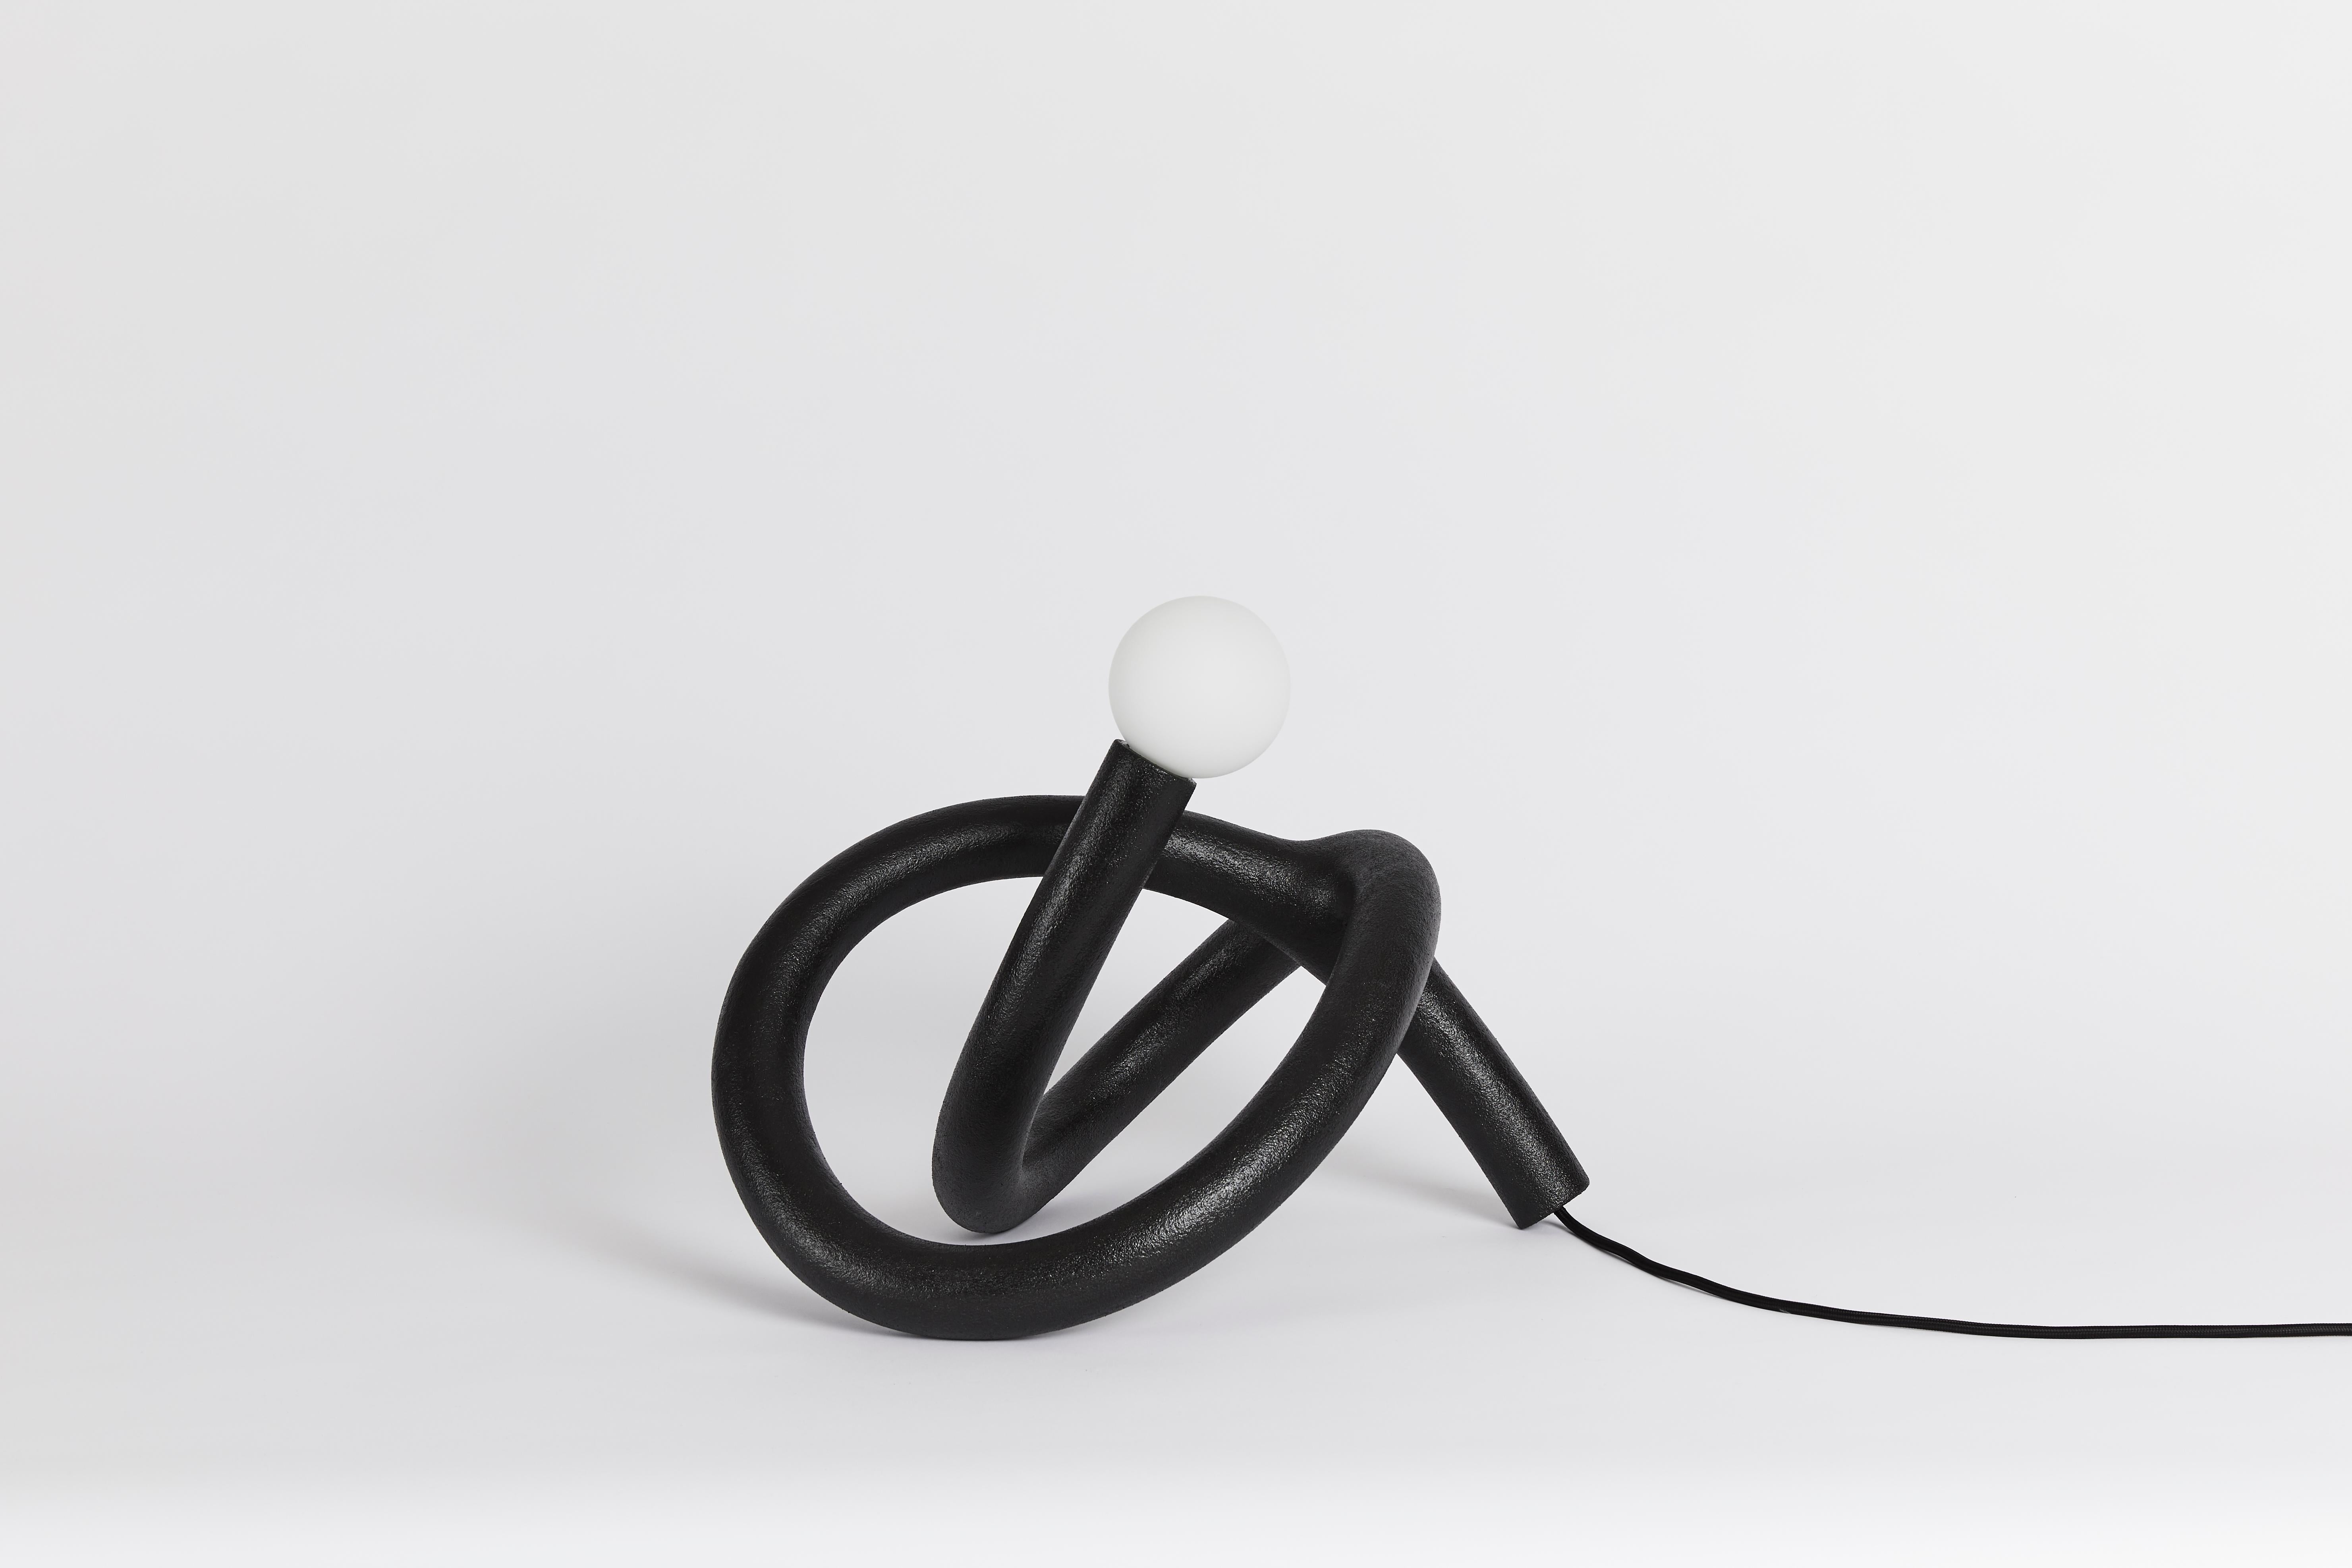 Random desk light by HWE
Limited edition
Materials: Waste SLS 3D nylon powder, sand from sustainable sources
Dimensions: W 33 x L 47 x  H 34 cm 
Colour: Anthracite
Also available in: Lemon, cream, aqua, grey, pink

All our lamps can be wired